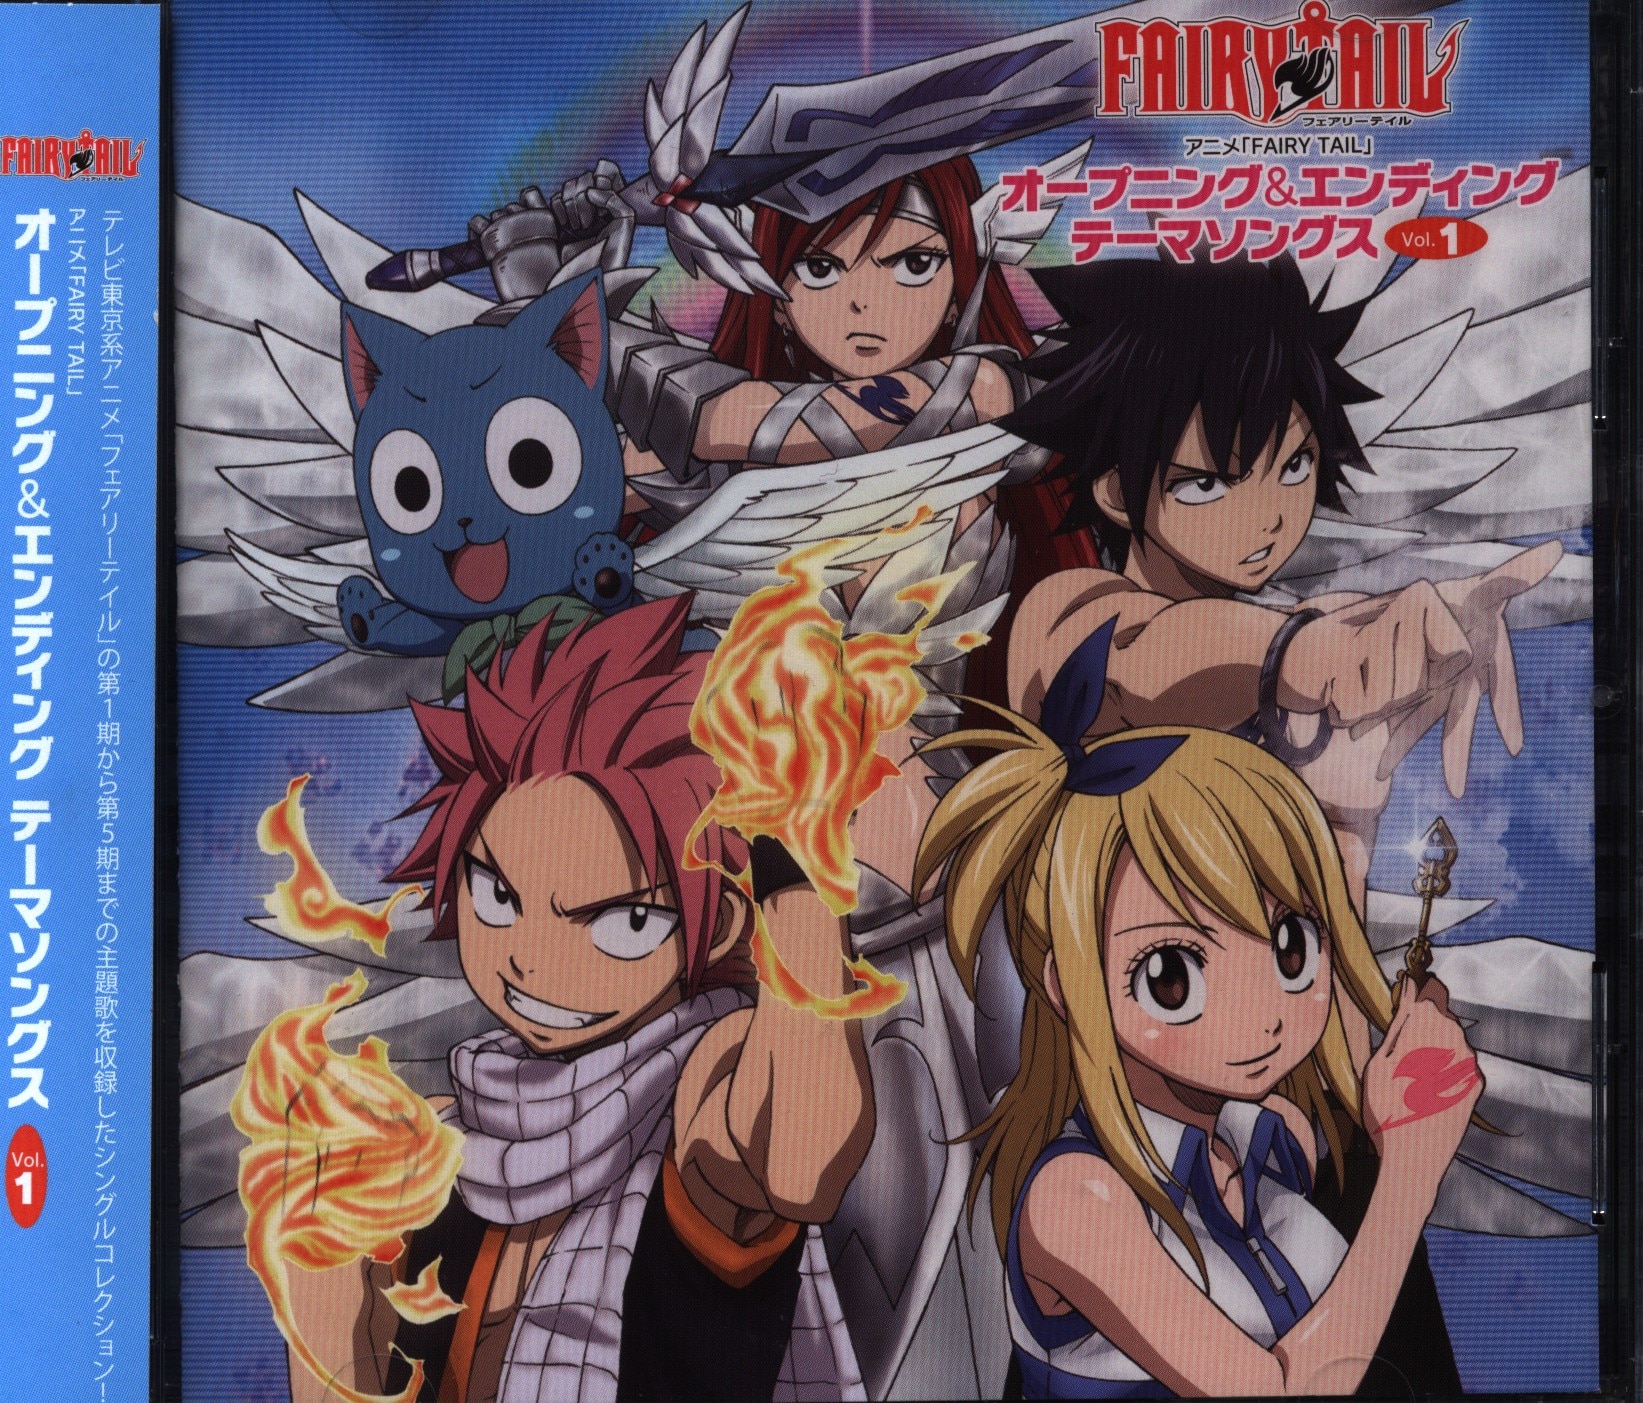 Anime Cd Anime Fairy Tail Opening And Ending Theme Songs Vol 1 Mandarake 在线商店